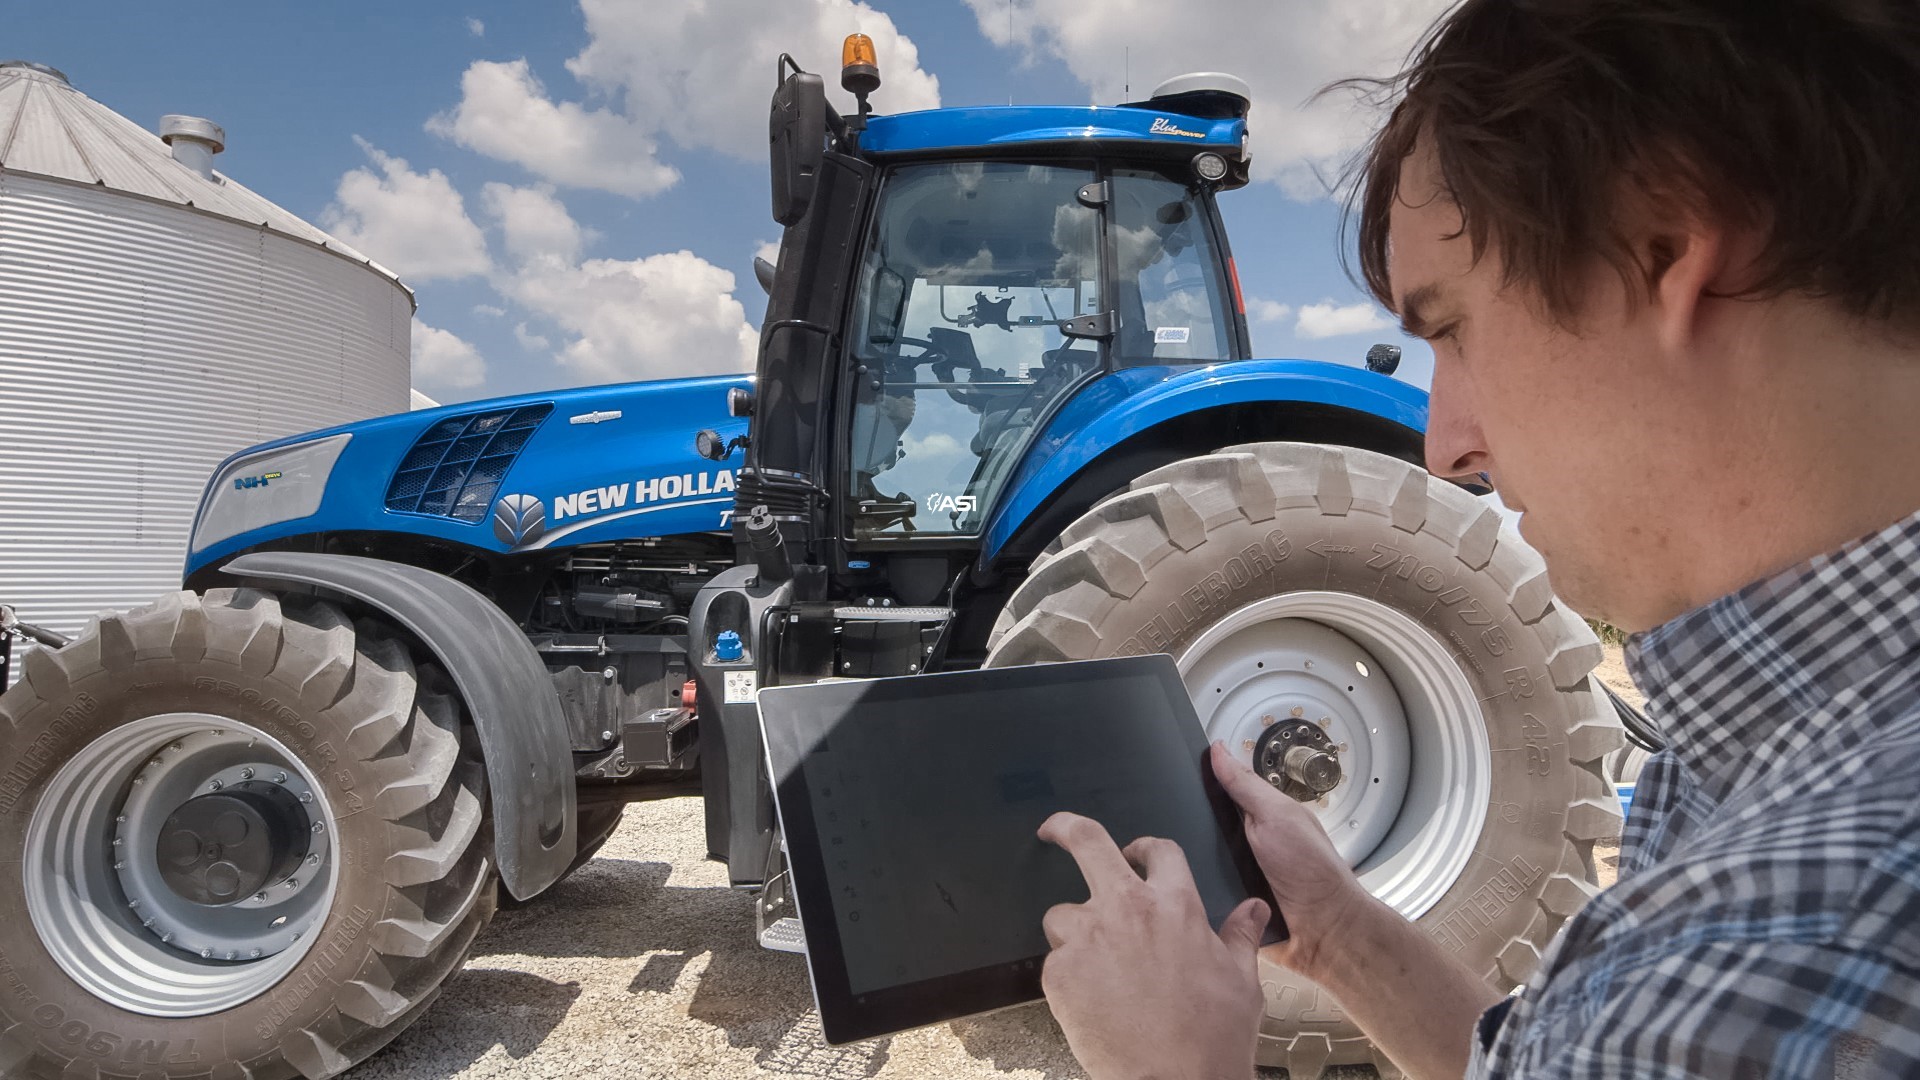 The portable tablet interface enables the user to start the machine and send it on its task autonomously